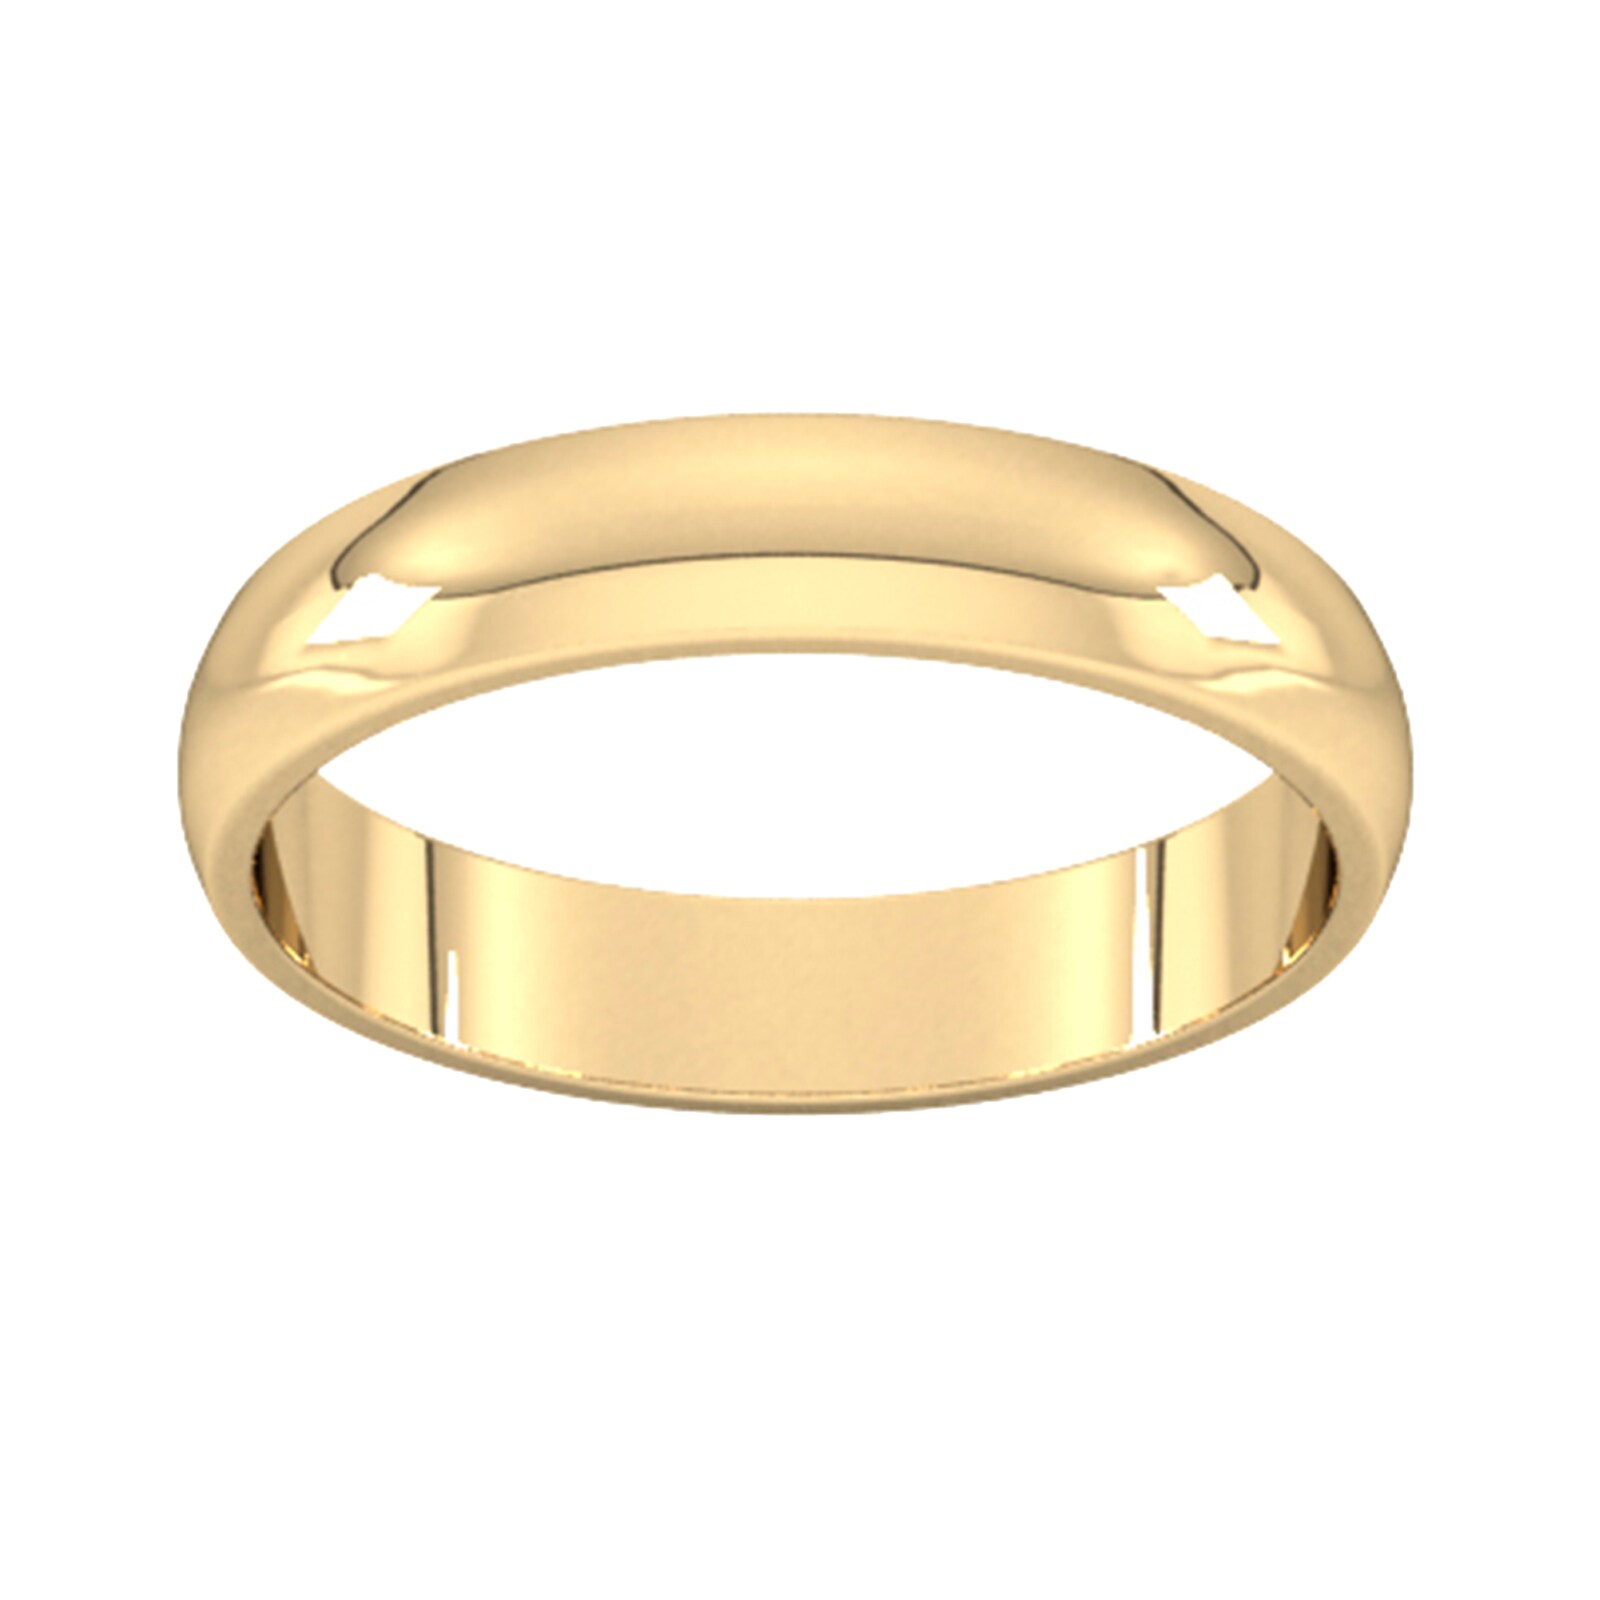 4mm D Shape Standard Wedding Ring In 9 Carat Yellow Gold - Ring Size H